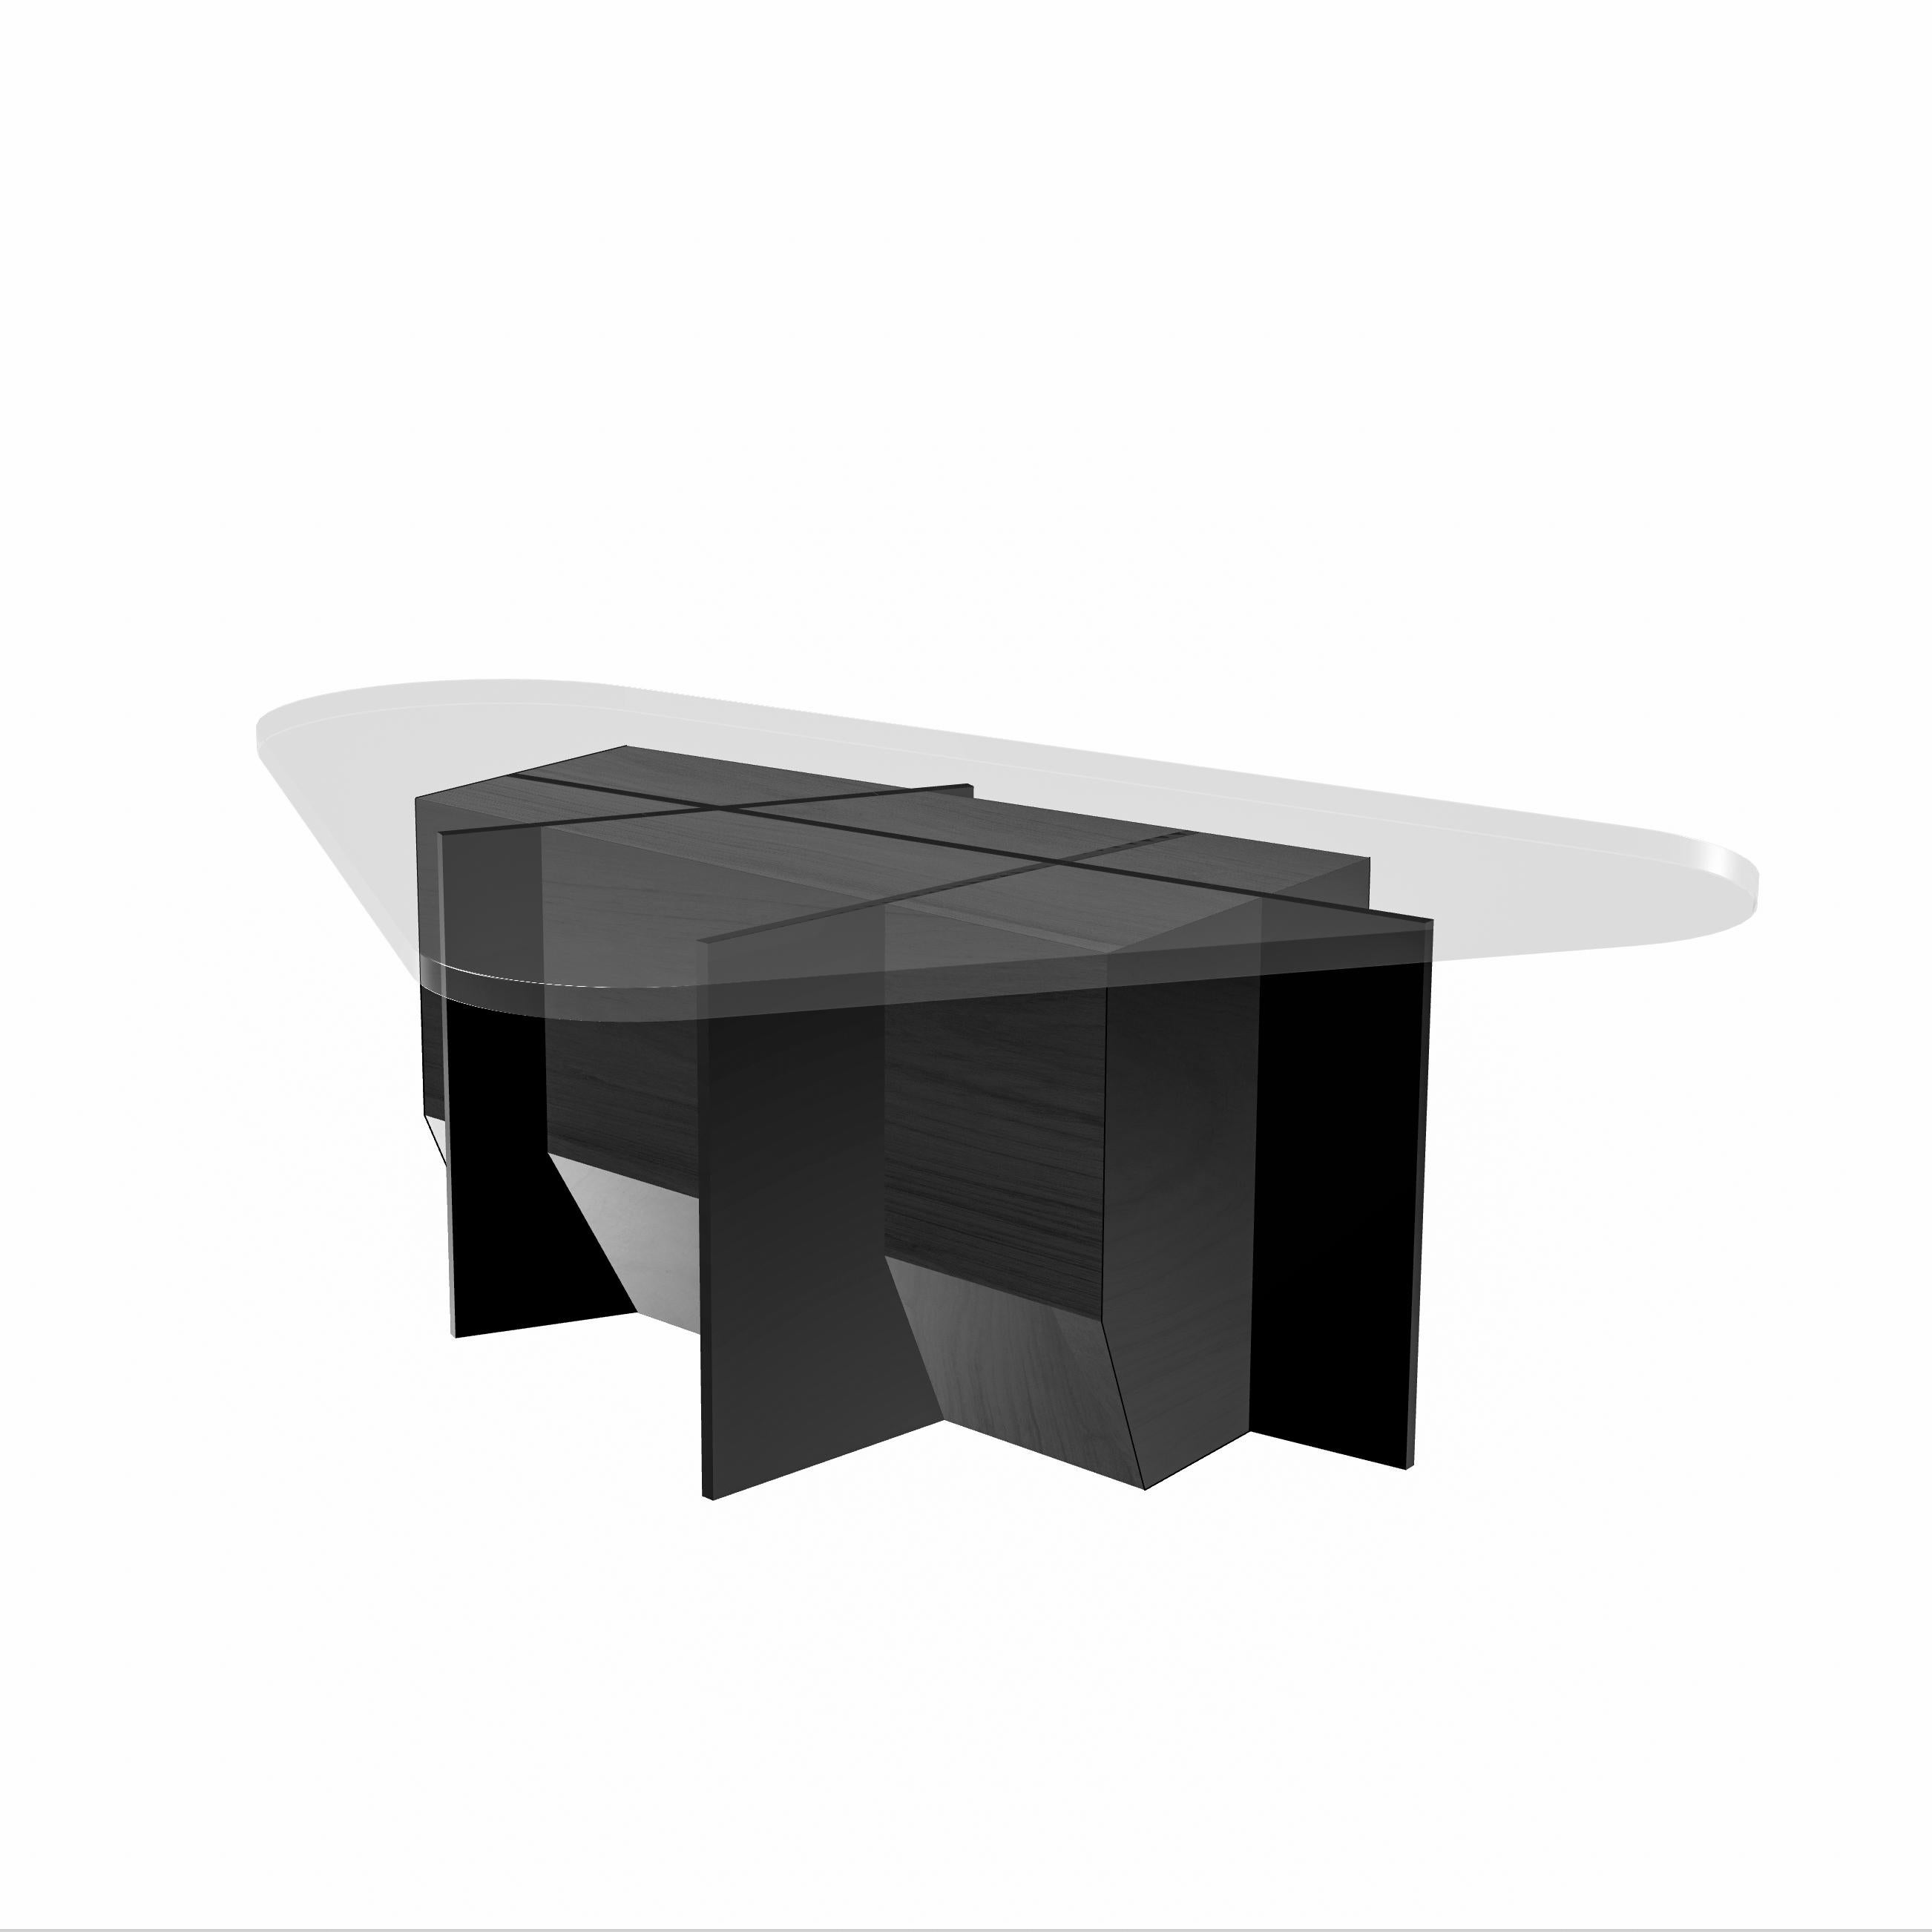 om6 contemporary Coffee Table, Black Oak, Steel and Glass by mjiila For Sale 2